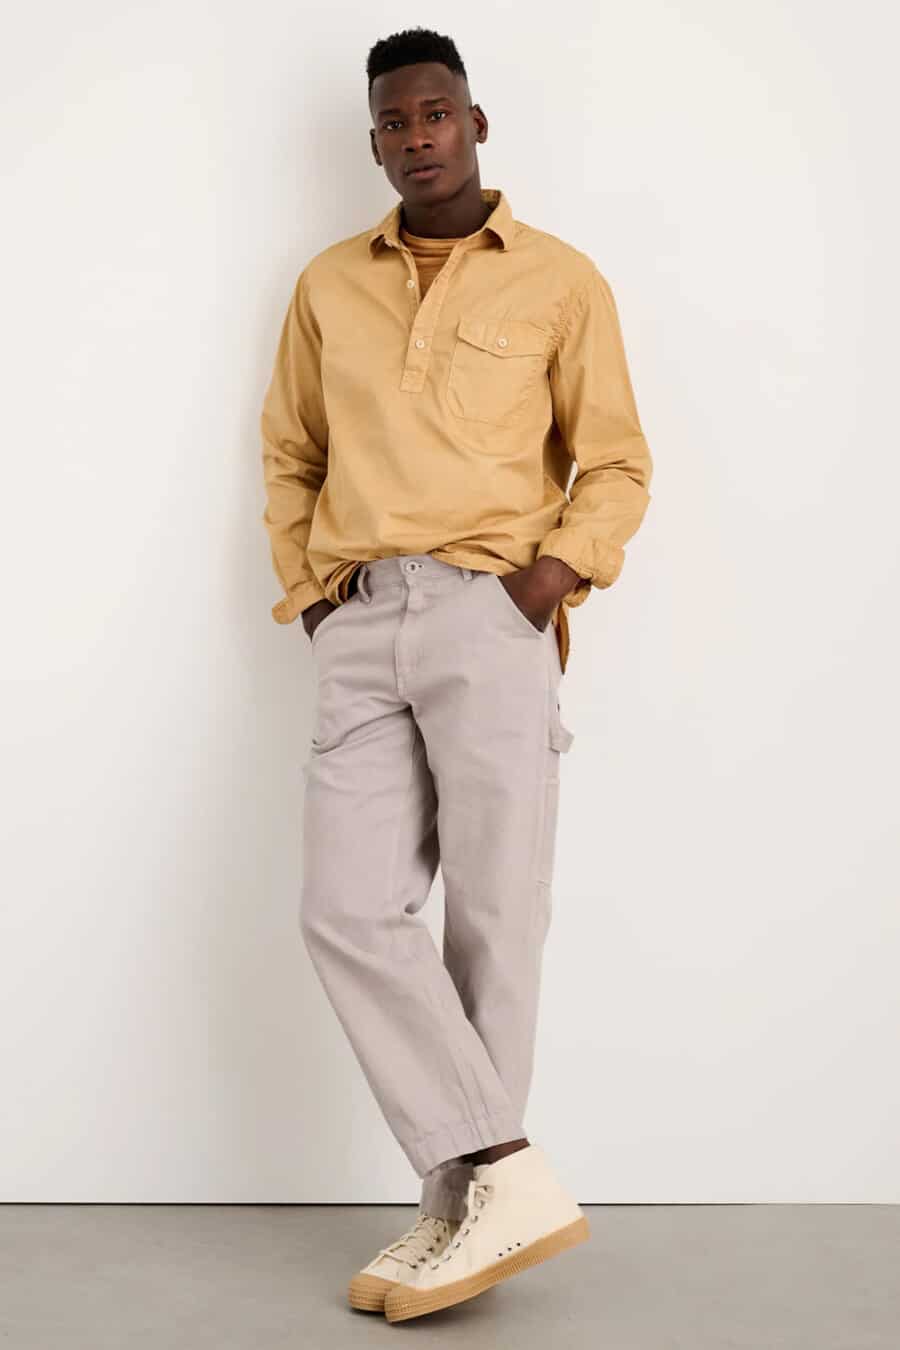 Men's light grey carpenter pants, yellow popover shirt and cream canvas high tops outfit